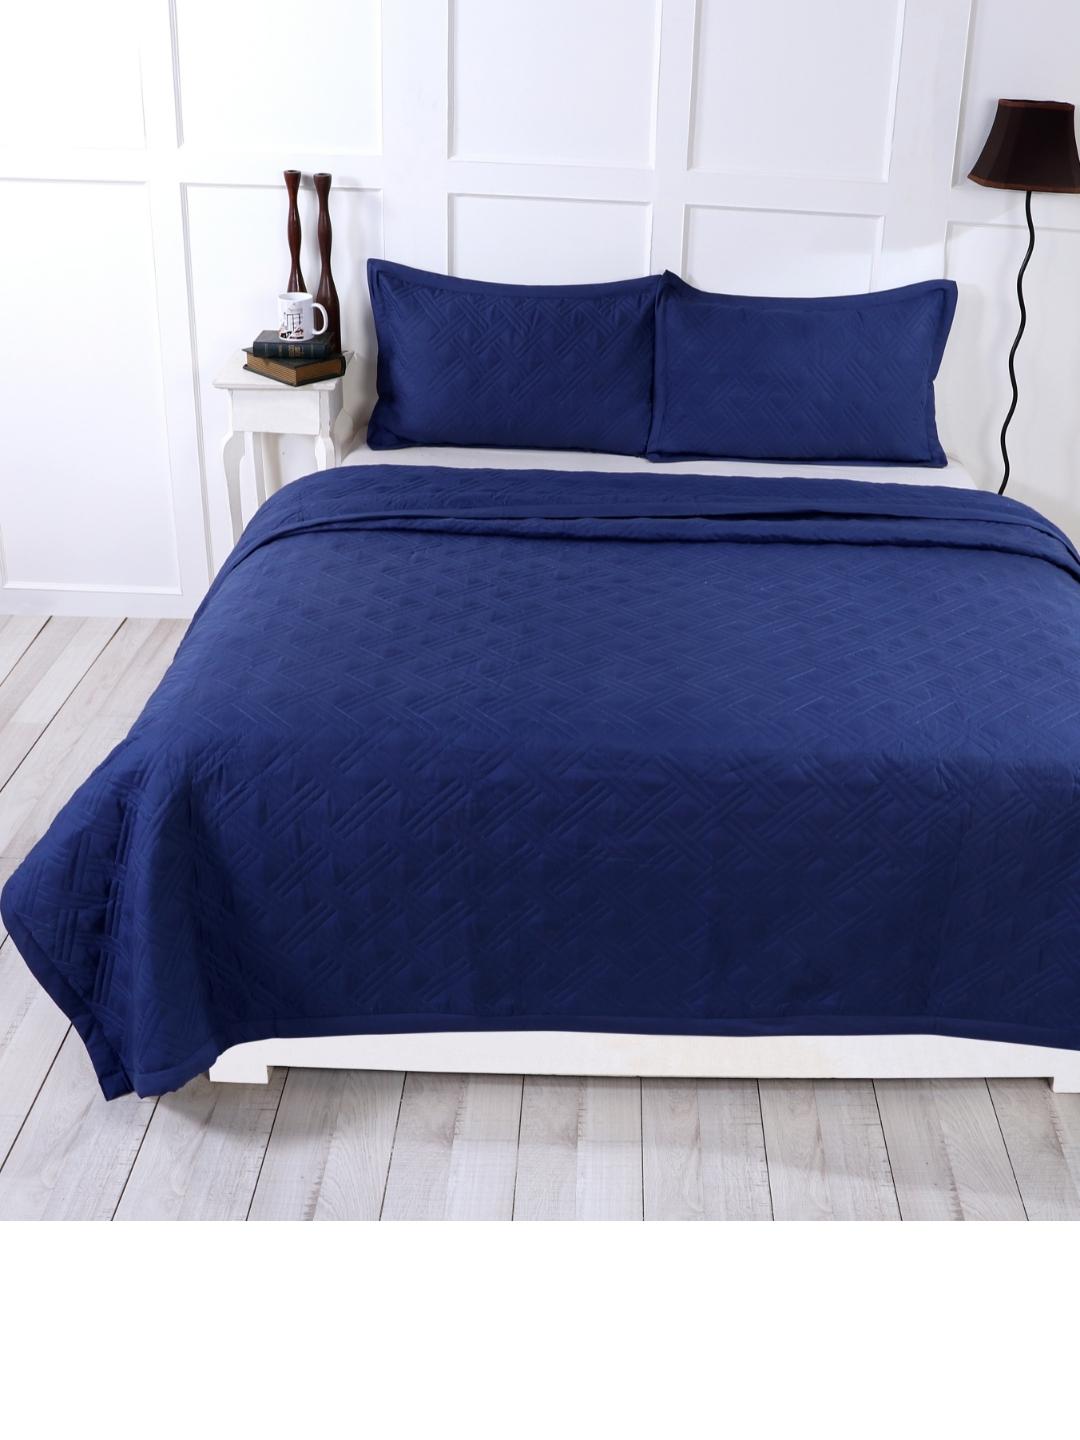 Double Bed Embroidered and Quilted Bedcover Set-Deep Blue